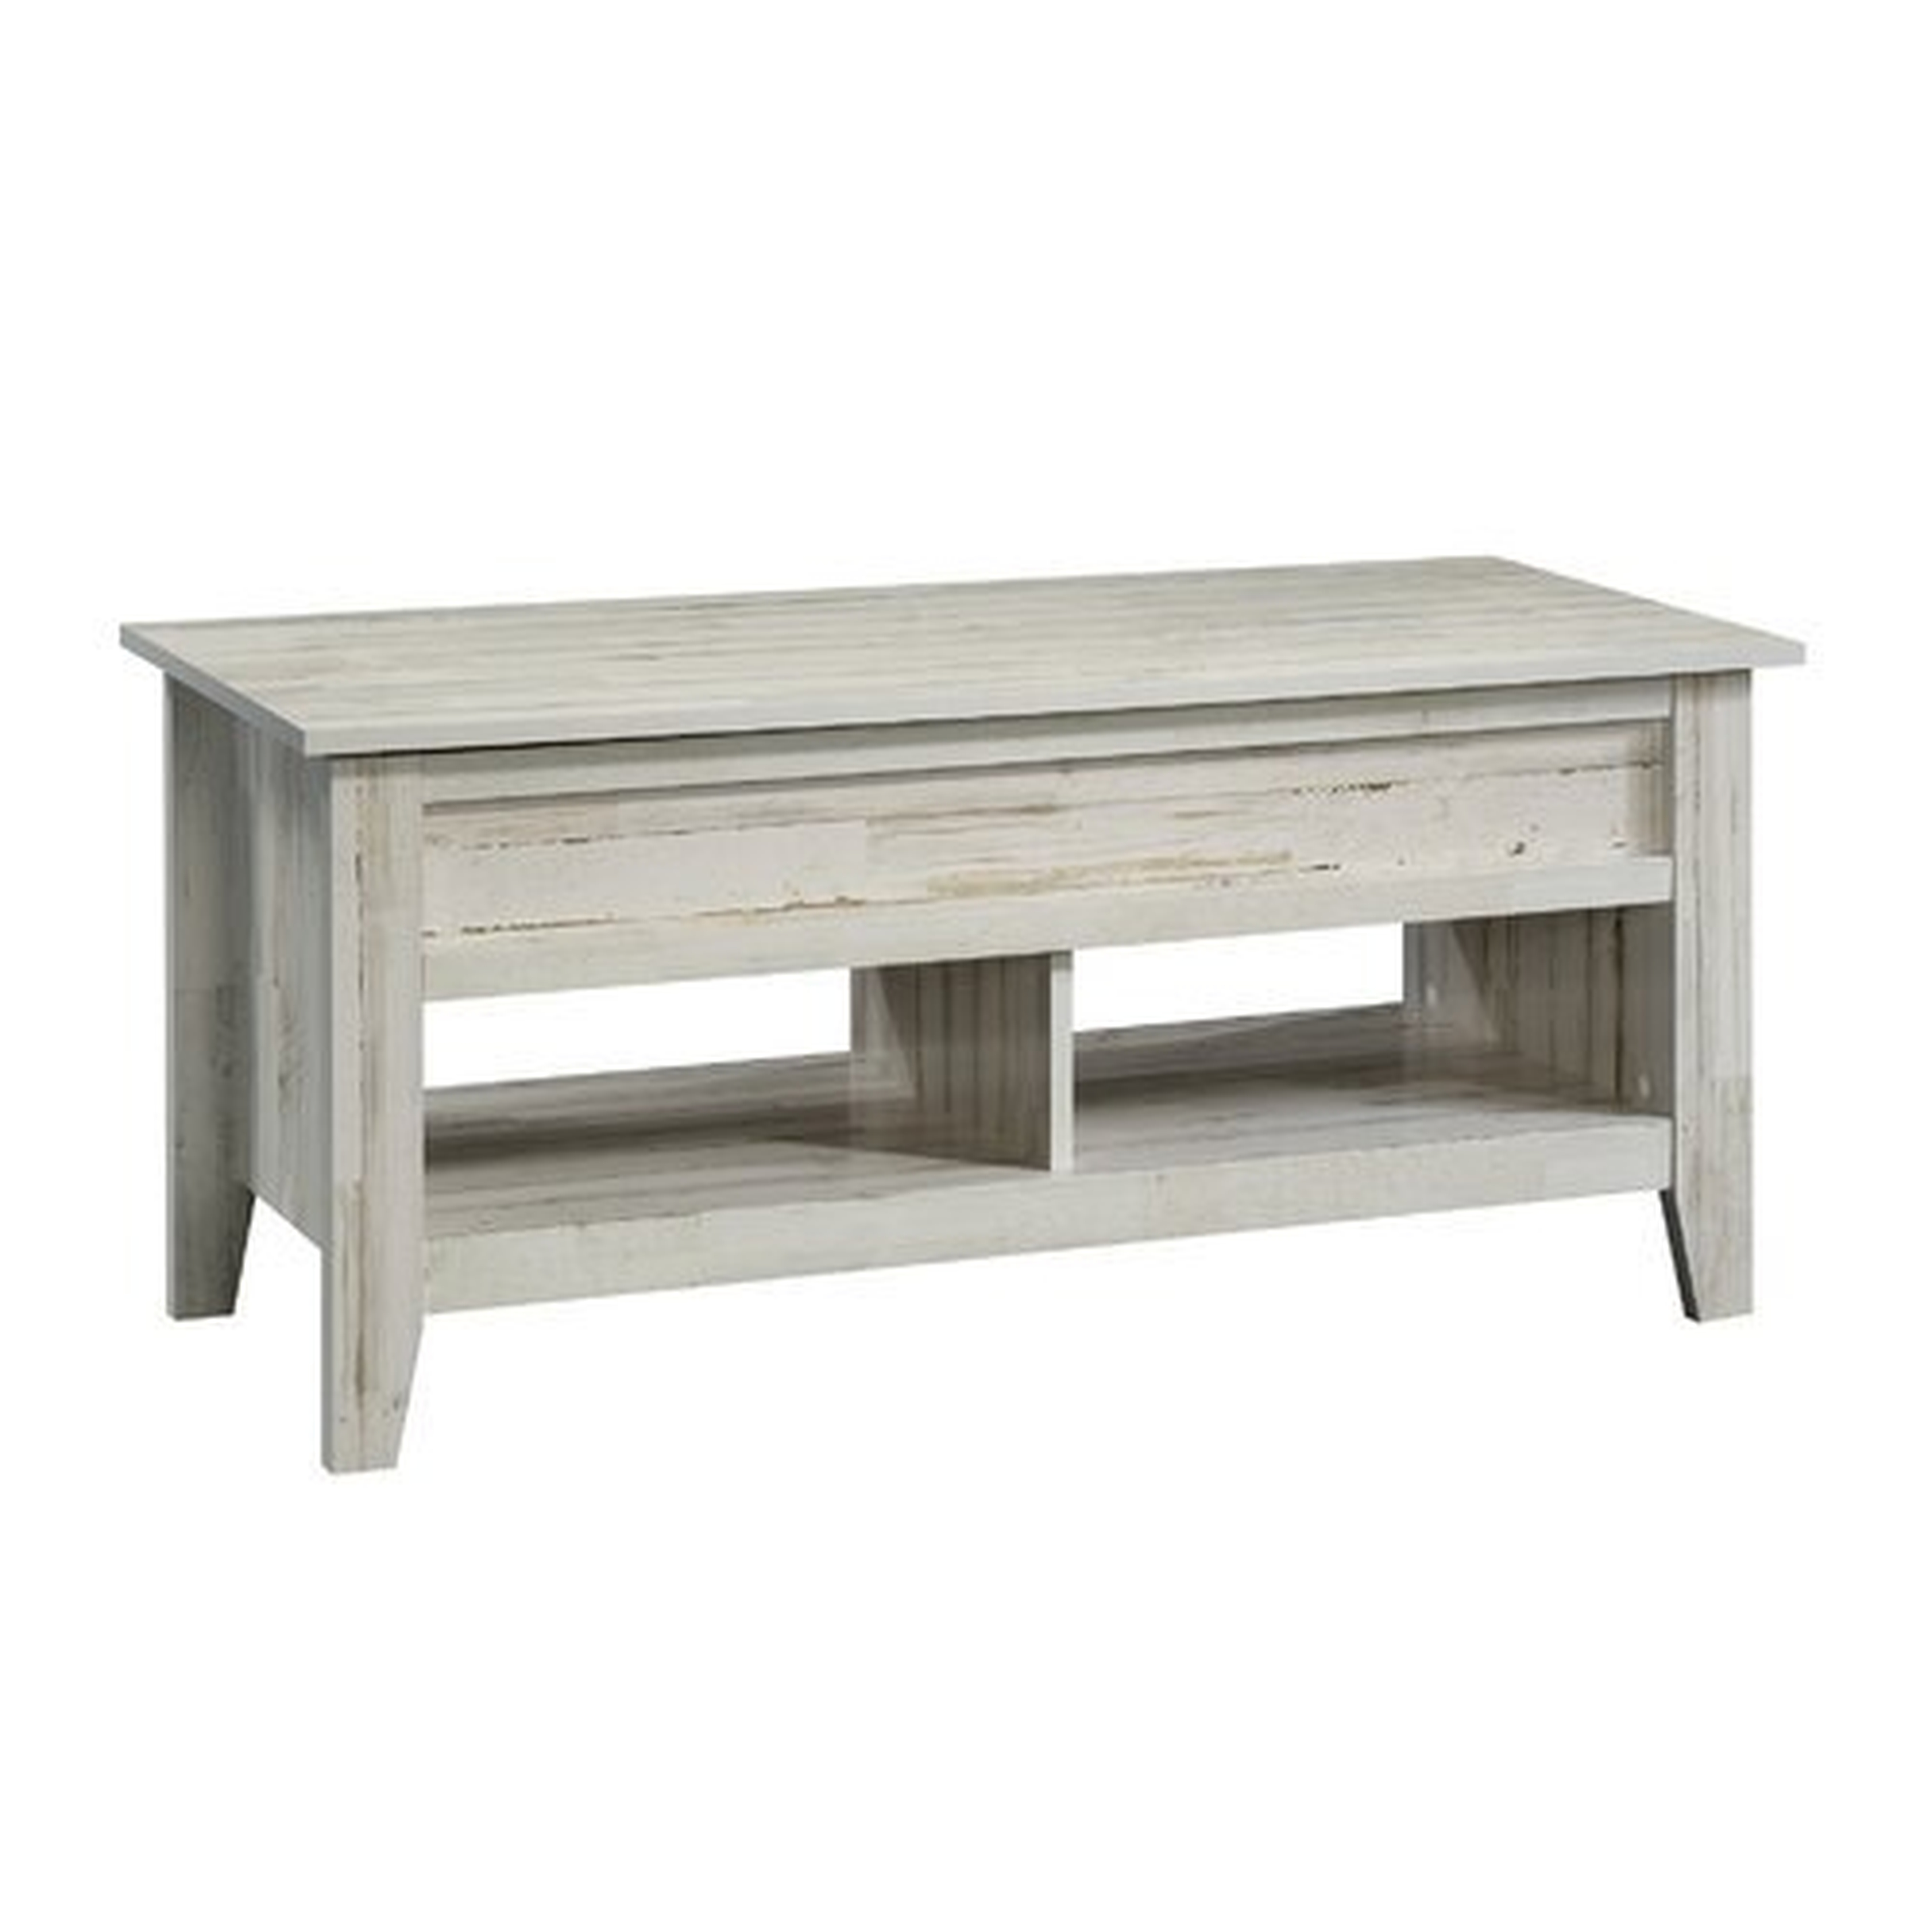 Riddleville Lift Top Coffee Table with Storage (white plank) - Wayfair